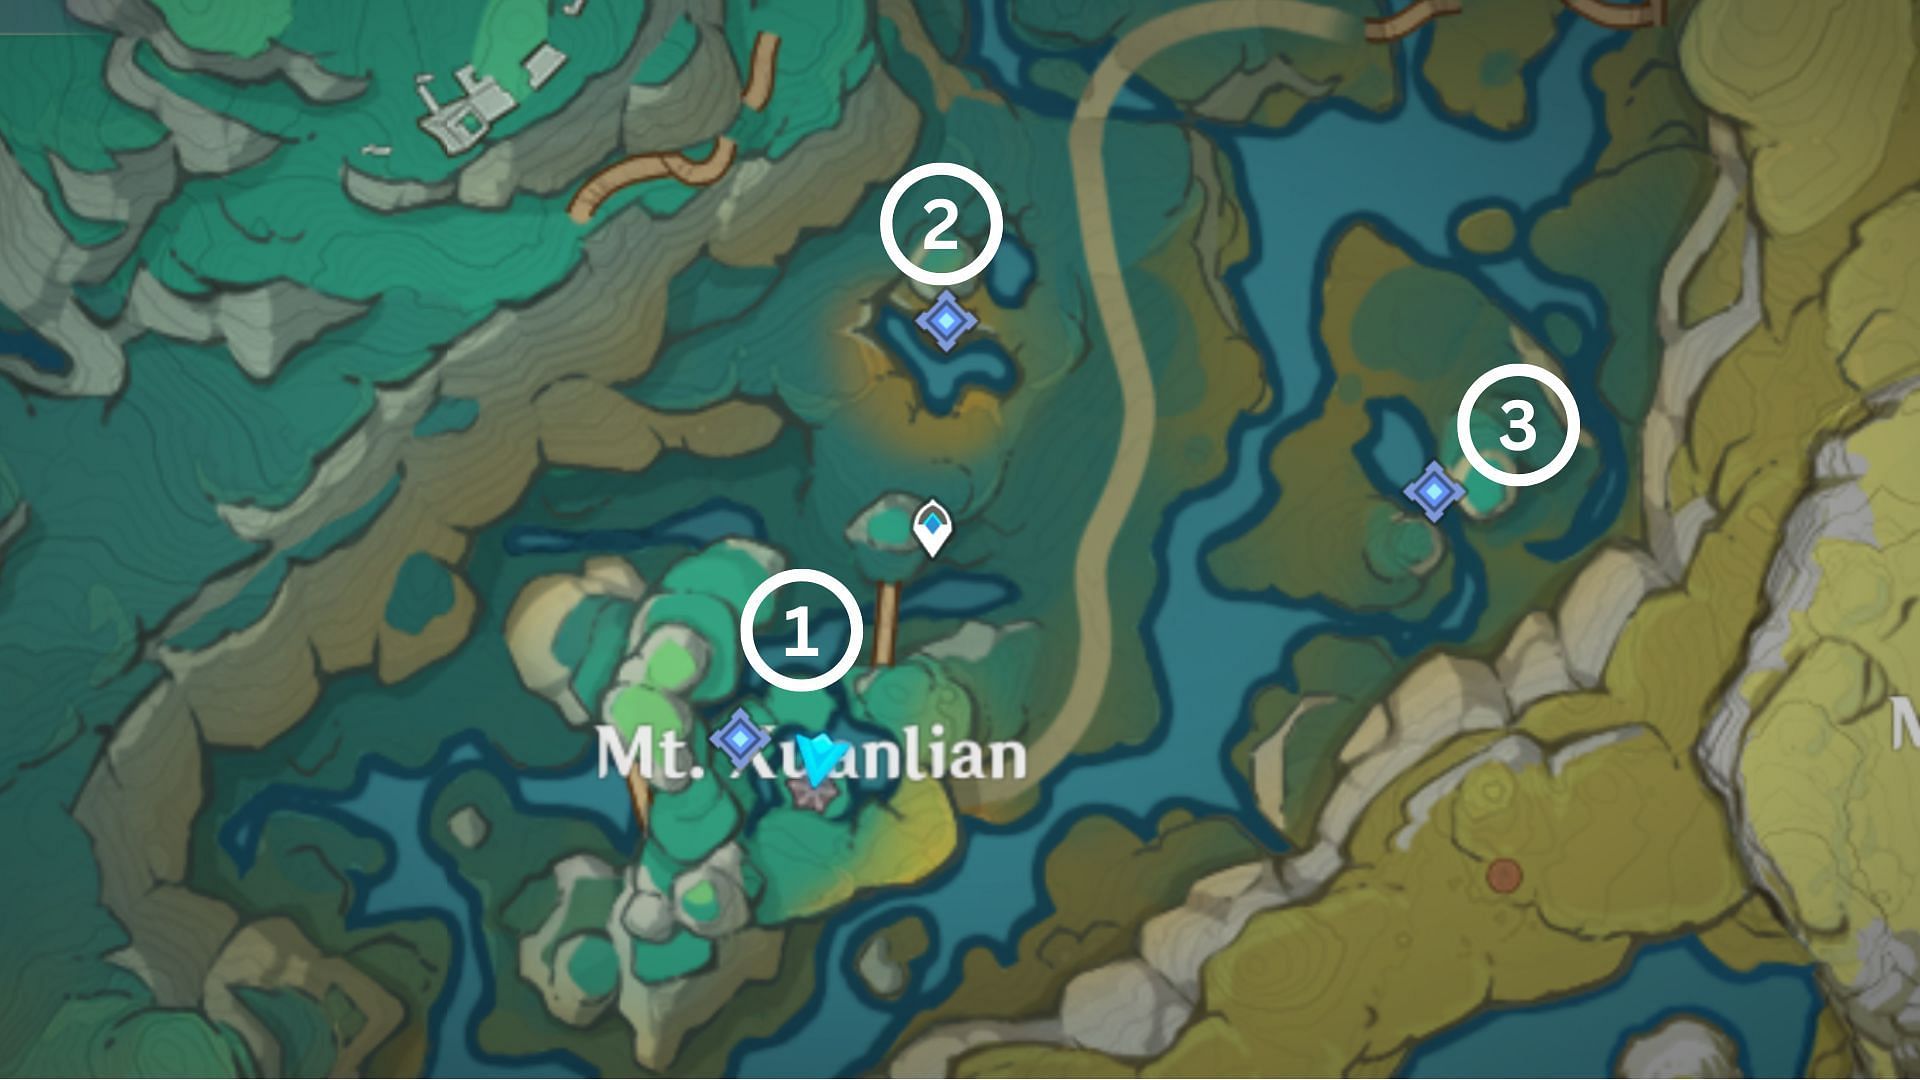 Location of all 3 Spirit Orbs puzzles (Image via HoYoverse)